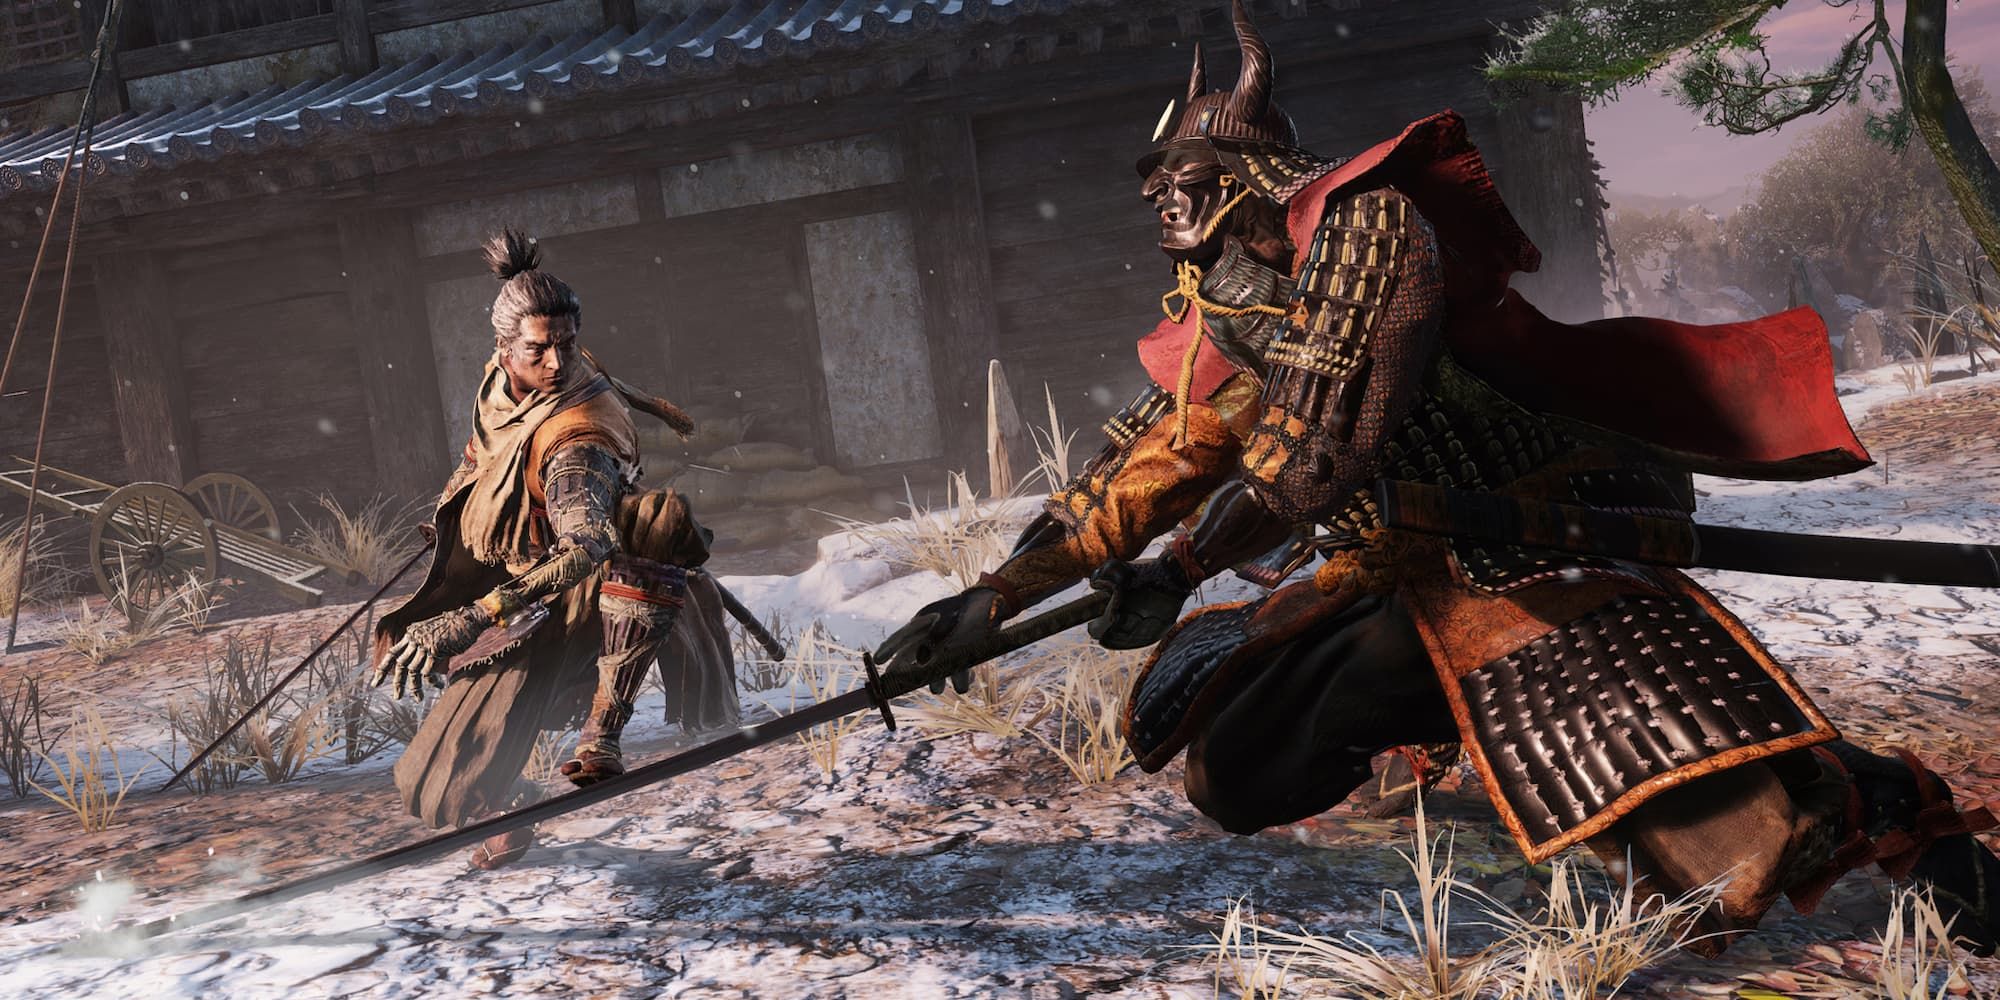 Two warriors battle with their swords in Sekiro: Shadows Die Twice.